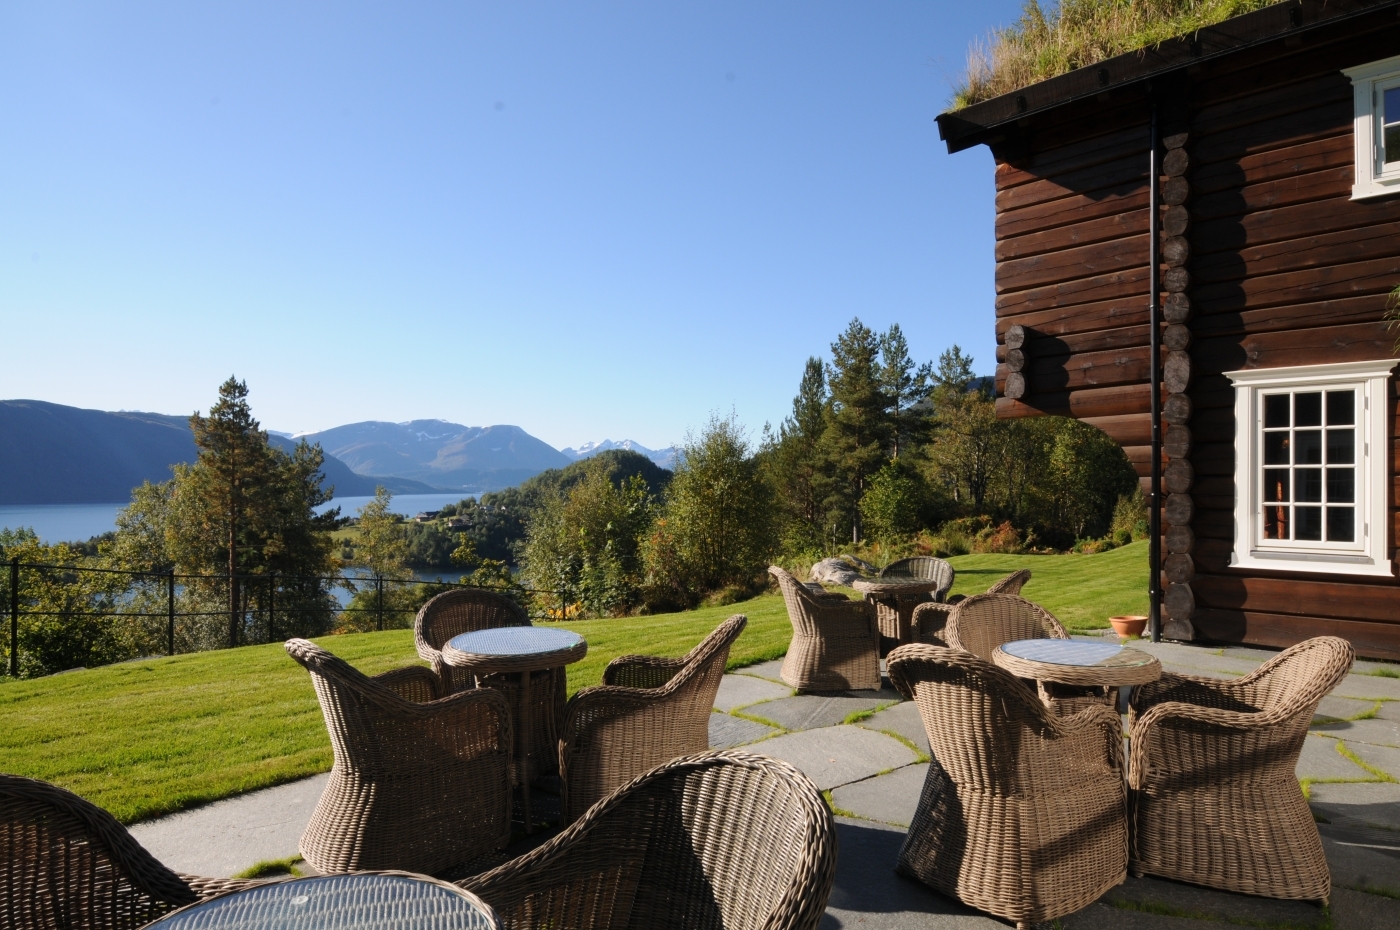 Open outdoor terrace with view of fjord at Storfjord Hotel in Norway